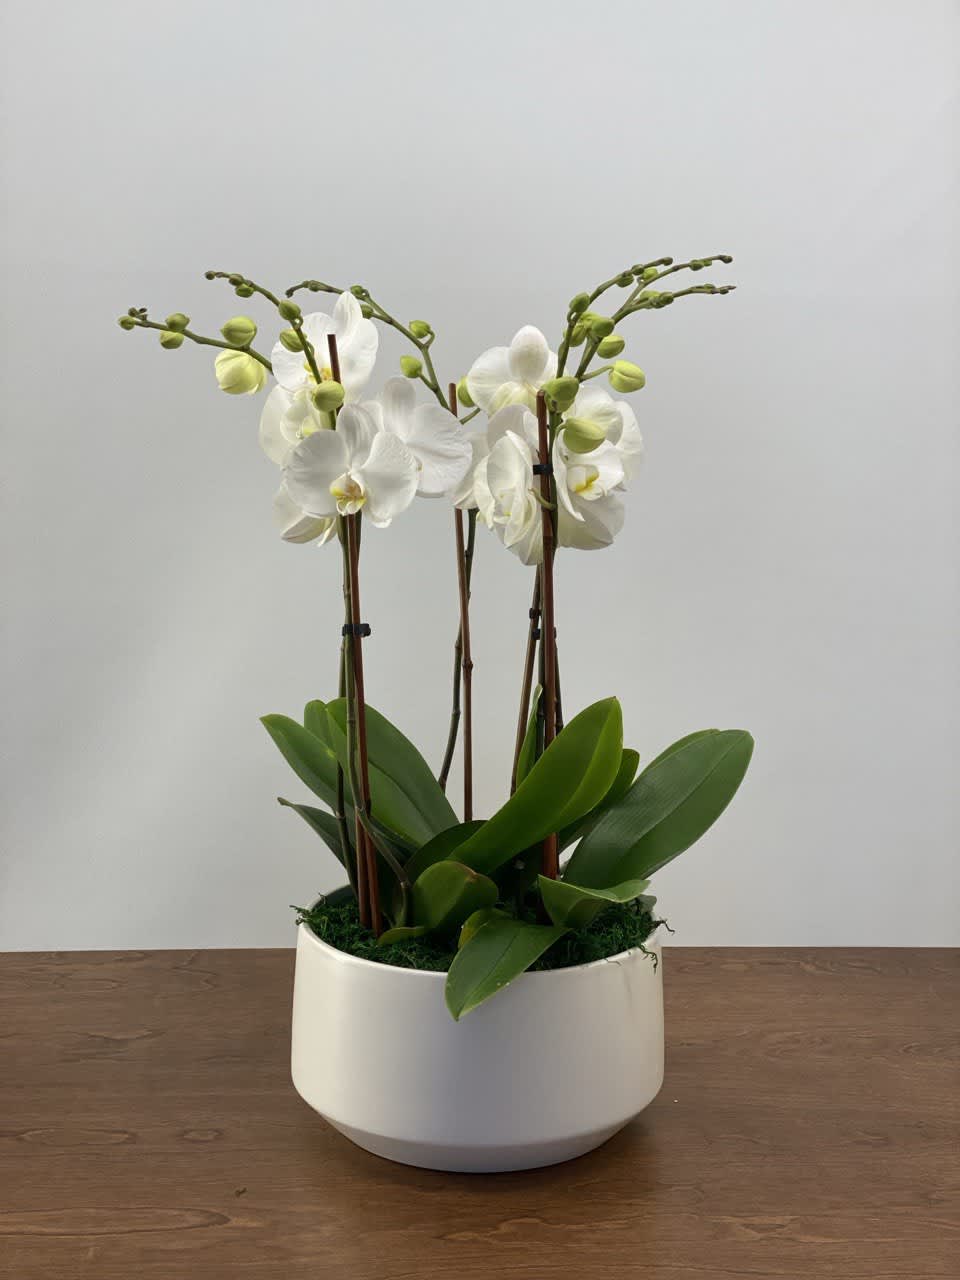 This elegant Orchid arrangement includes three double- stem plants( 6 stems totally)